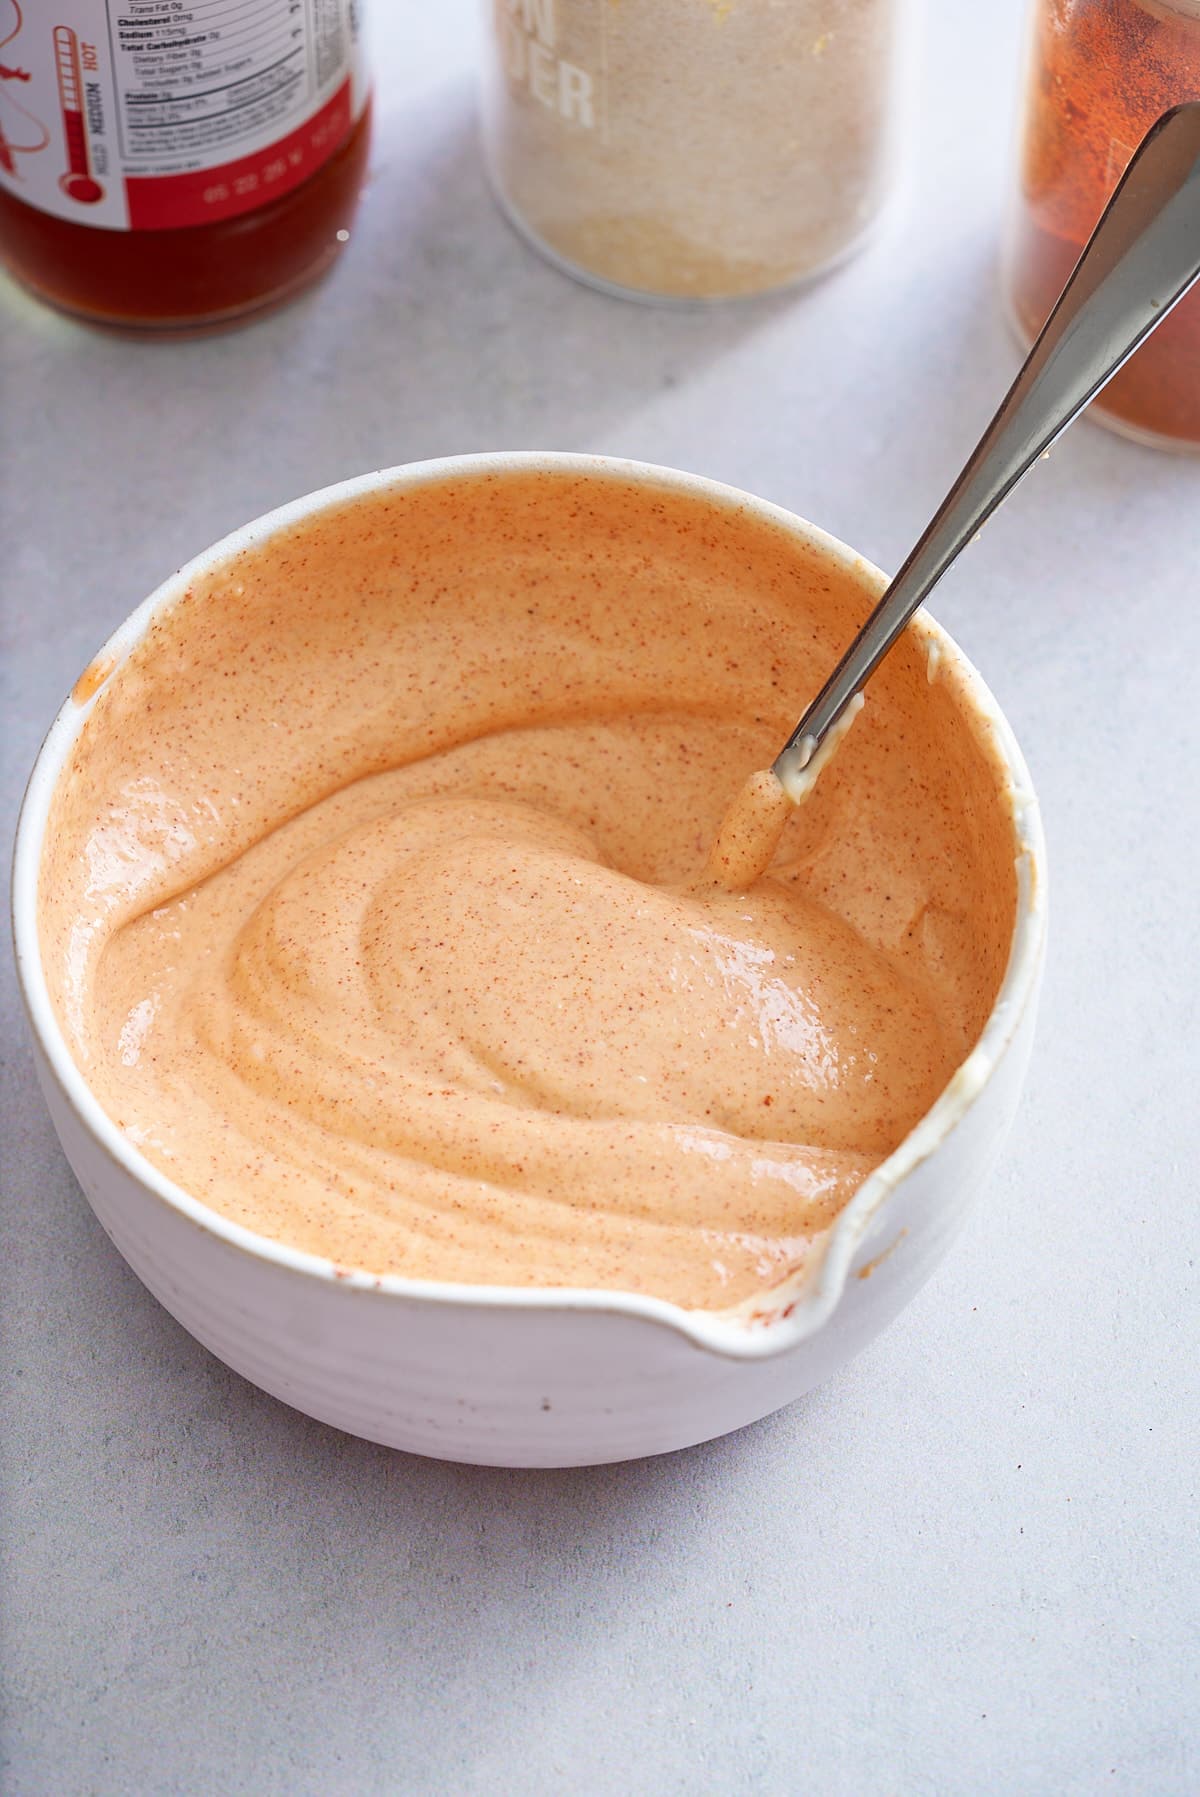 spicy mayonnaise mixed together and ready to serve in a white bowl.